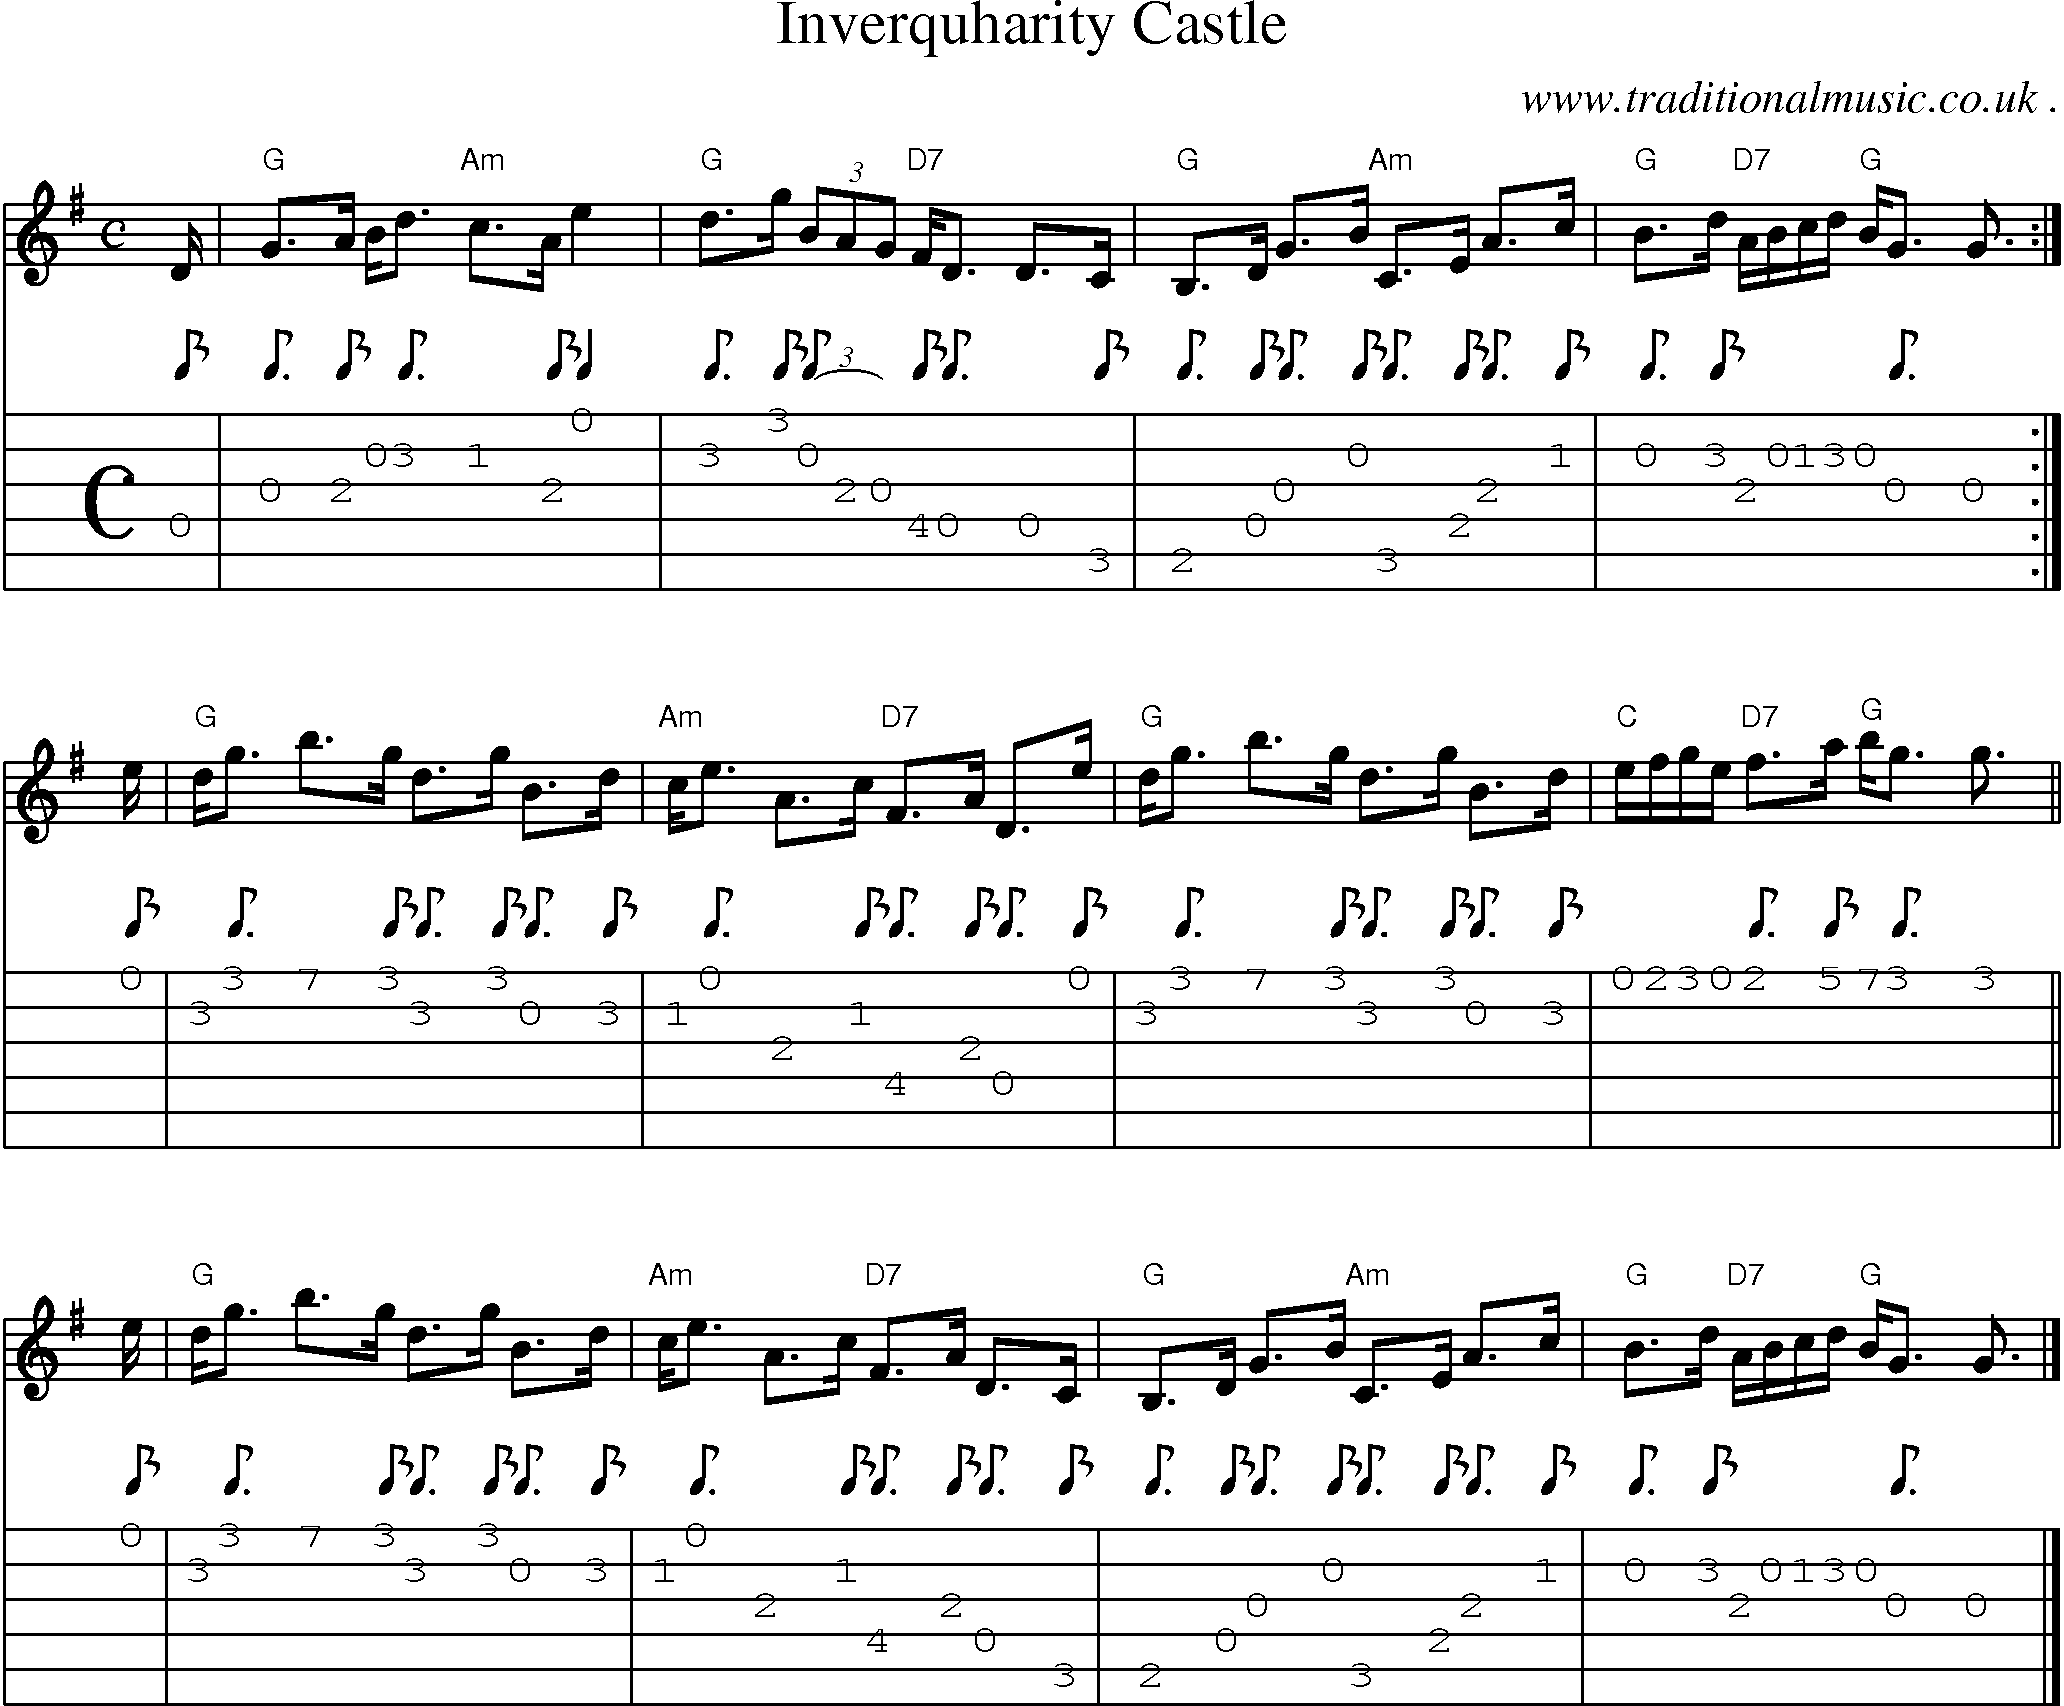 Sheet-music  score, Chords and Guitar Tabs for Inverquharity Castle